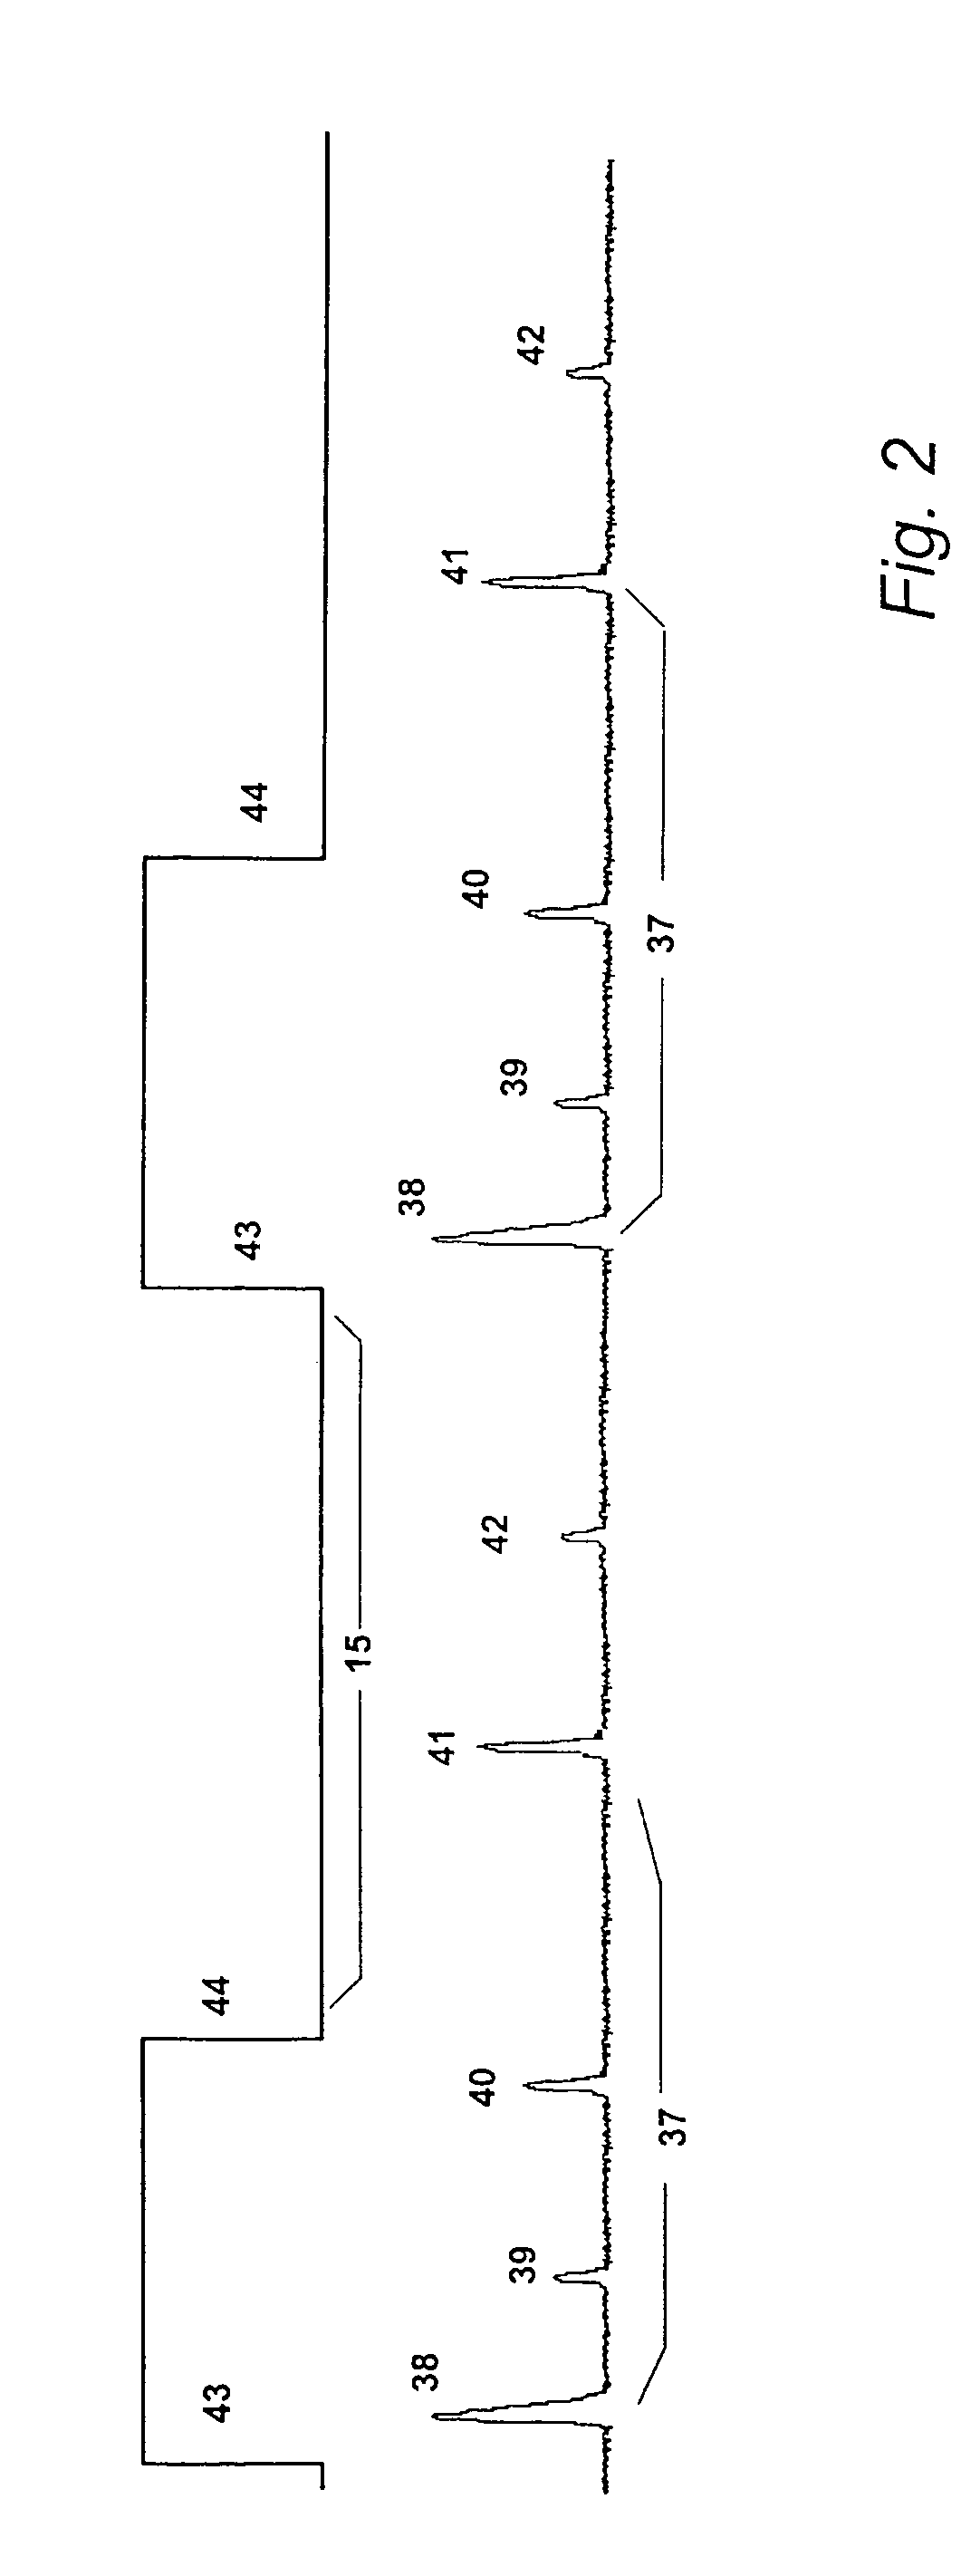 Method for determining a level of material with a two-wire radar sensor comprising intermittently operating circuitry components and a two-wire radar sensor